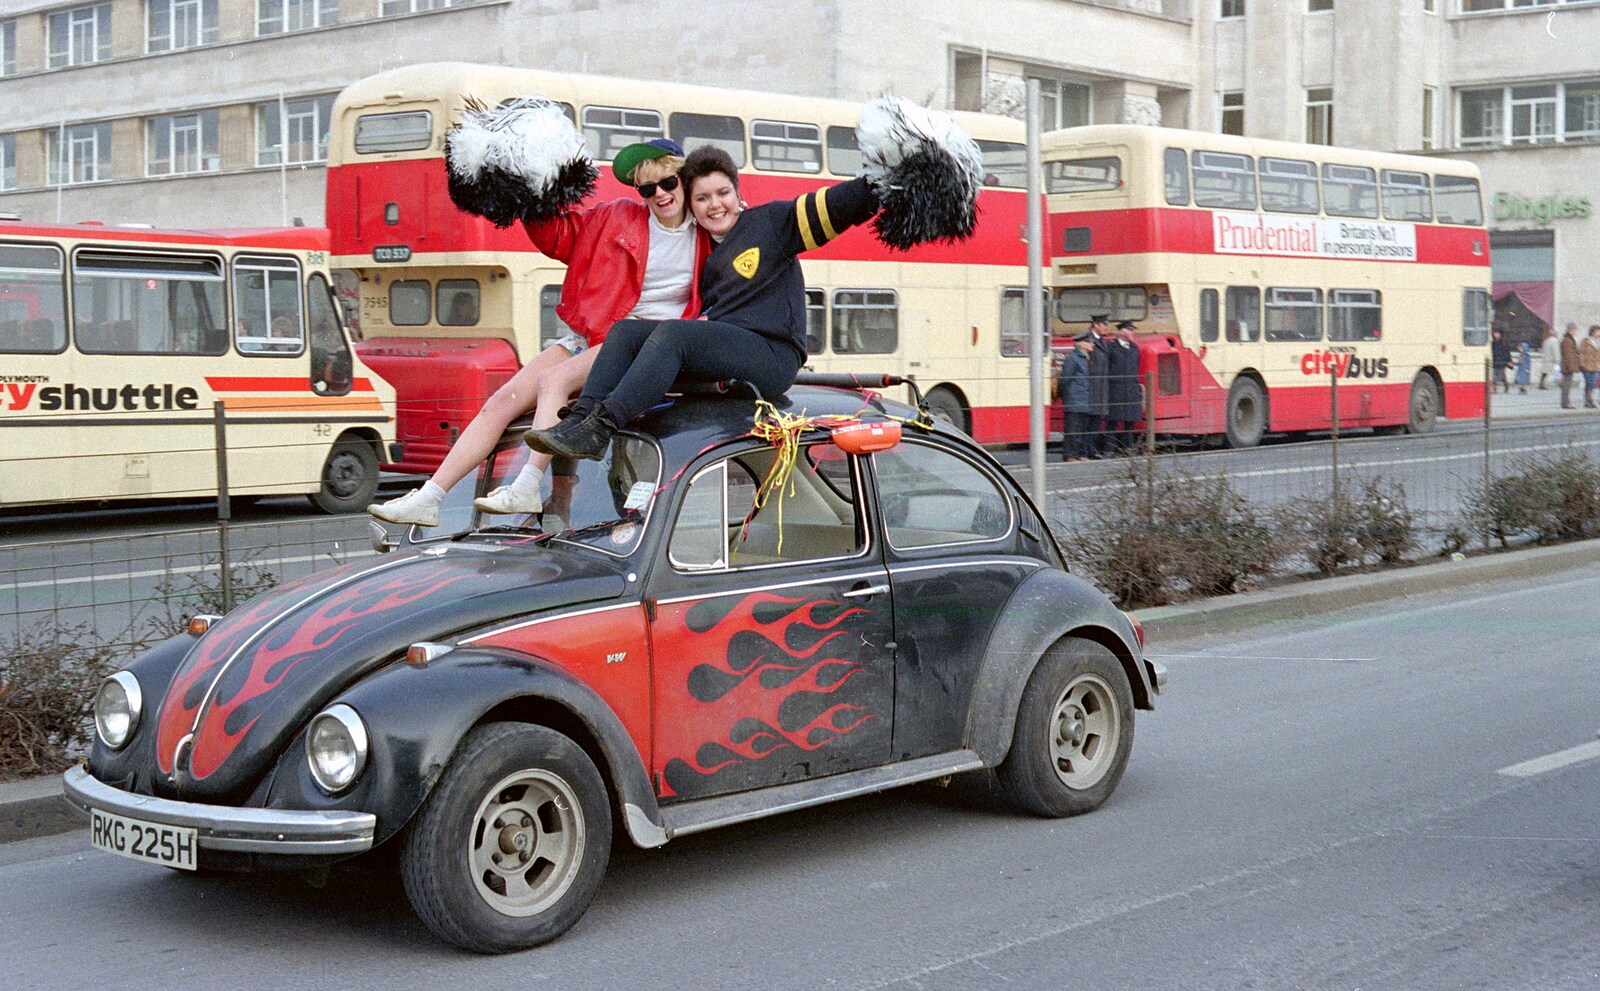 A couple of BABS girlies on a flamed-up Beetle from Uni: PPSU "Jazz" RAG Street Parade, Plymouth, Devon - 17th February 1986